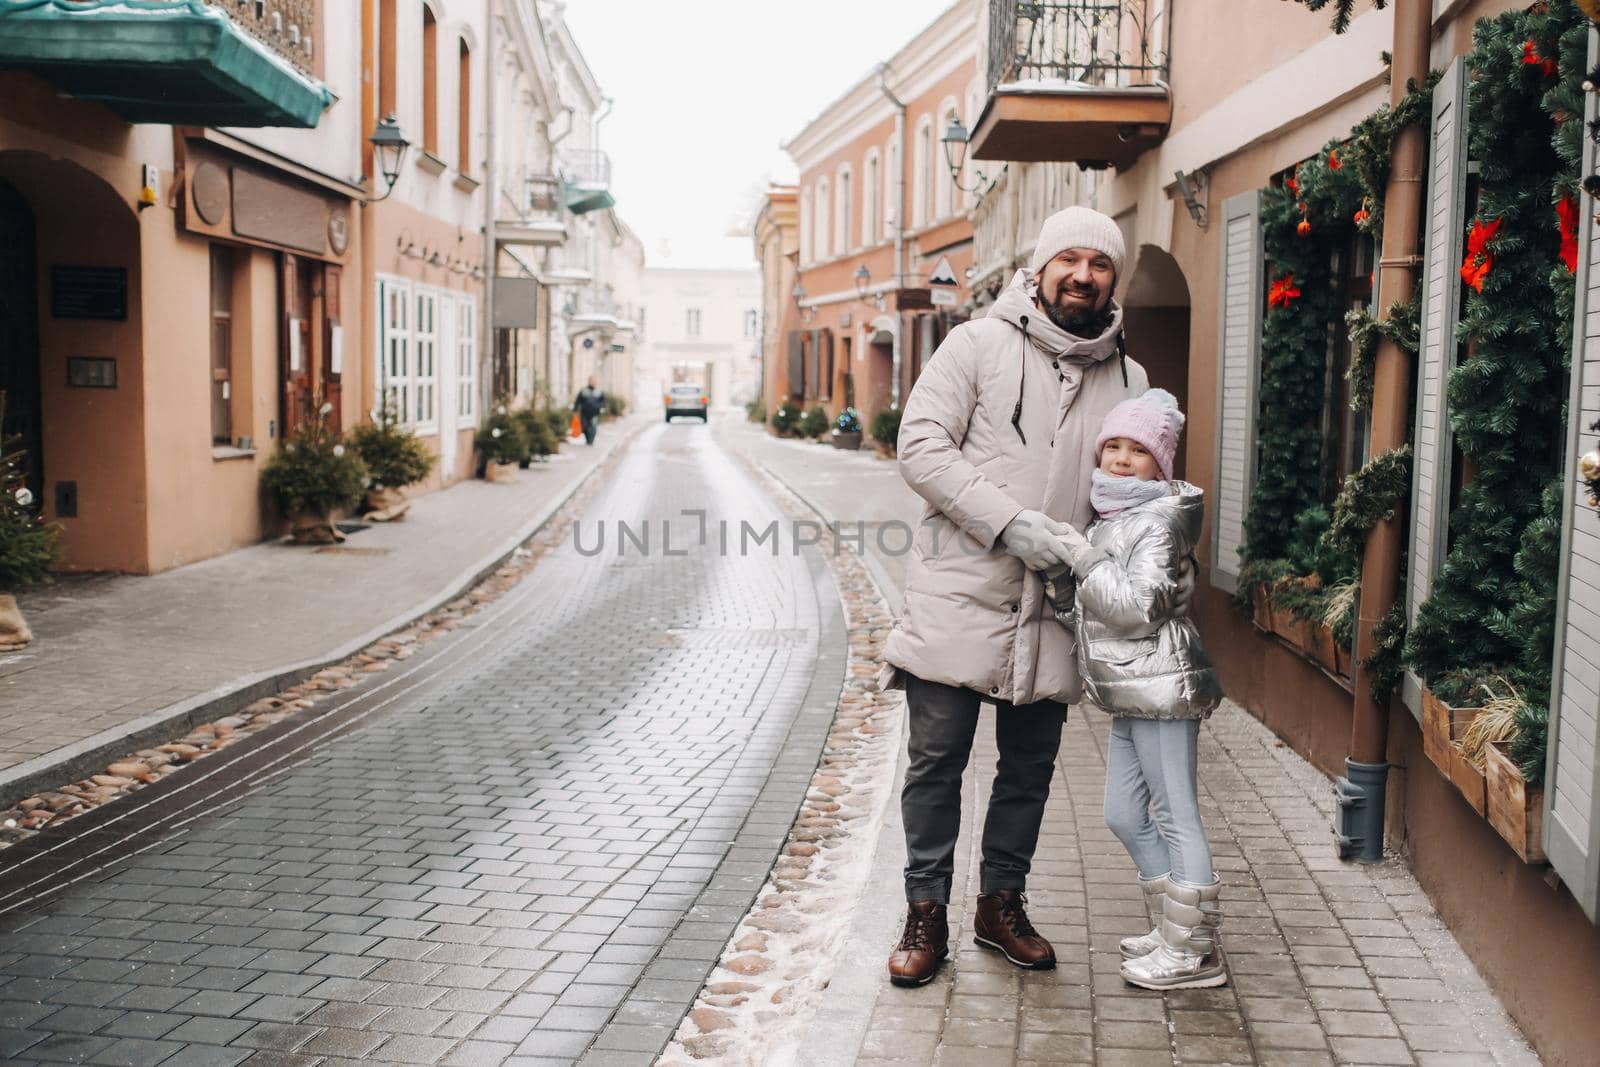 A family walks around the New Year's city of Vilnius.Lithuania.